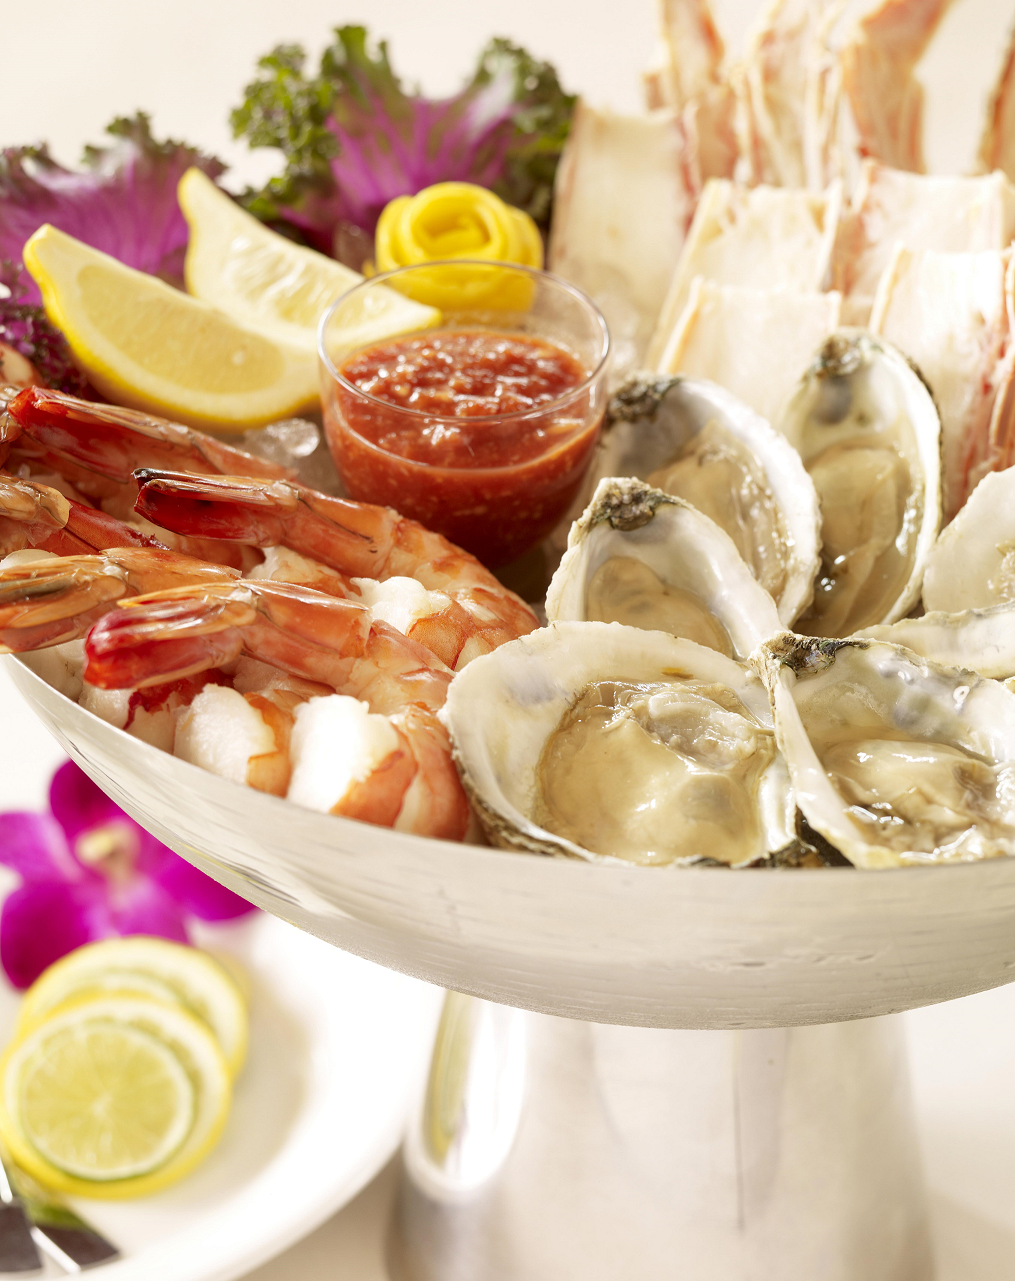 Taste the best seafood from the best raw bar in the region located at Jag's Steak and Seafood